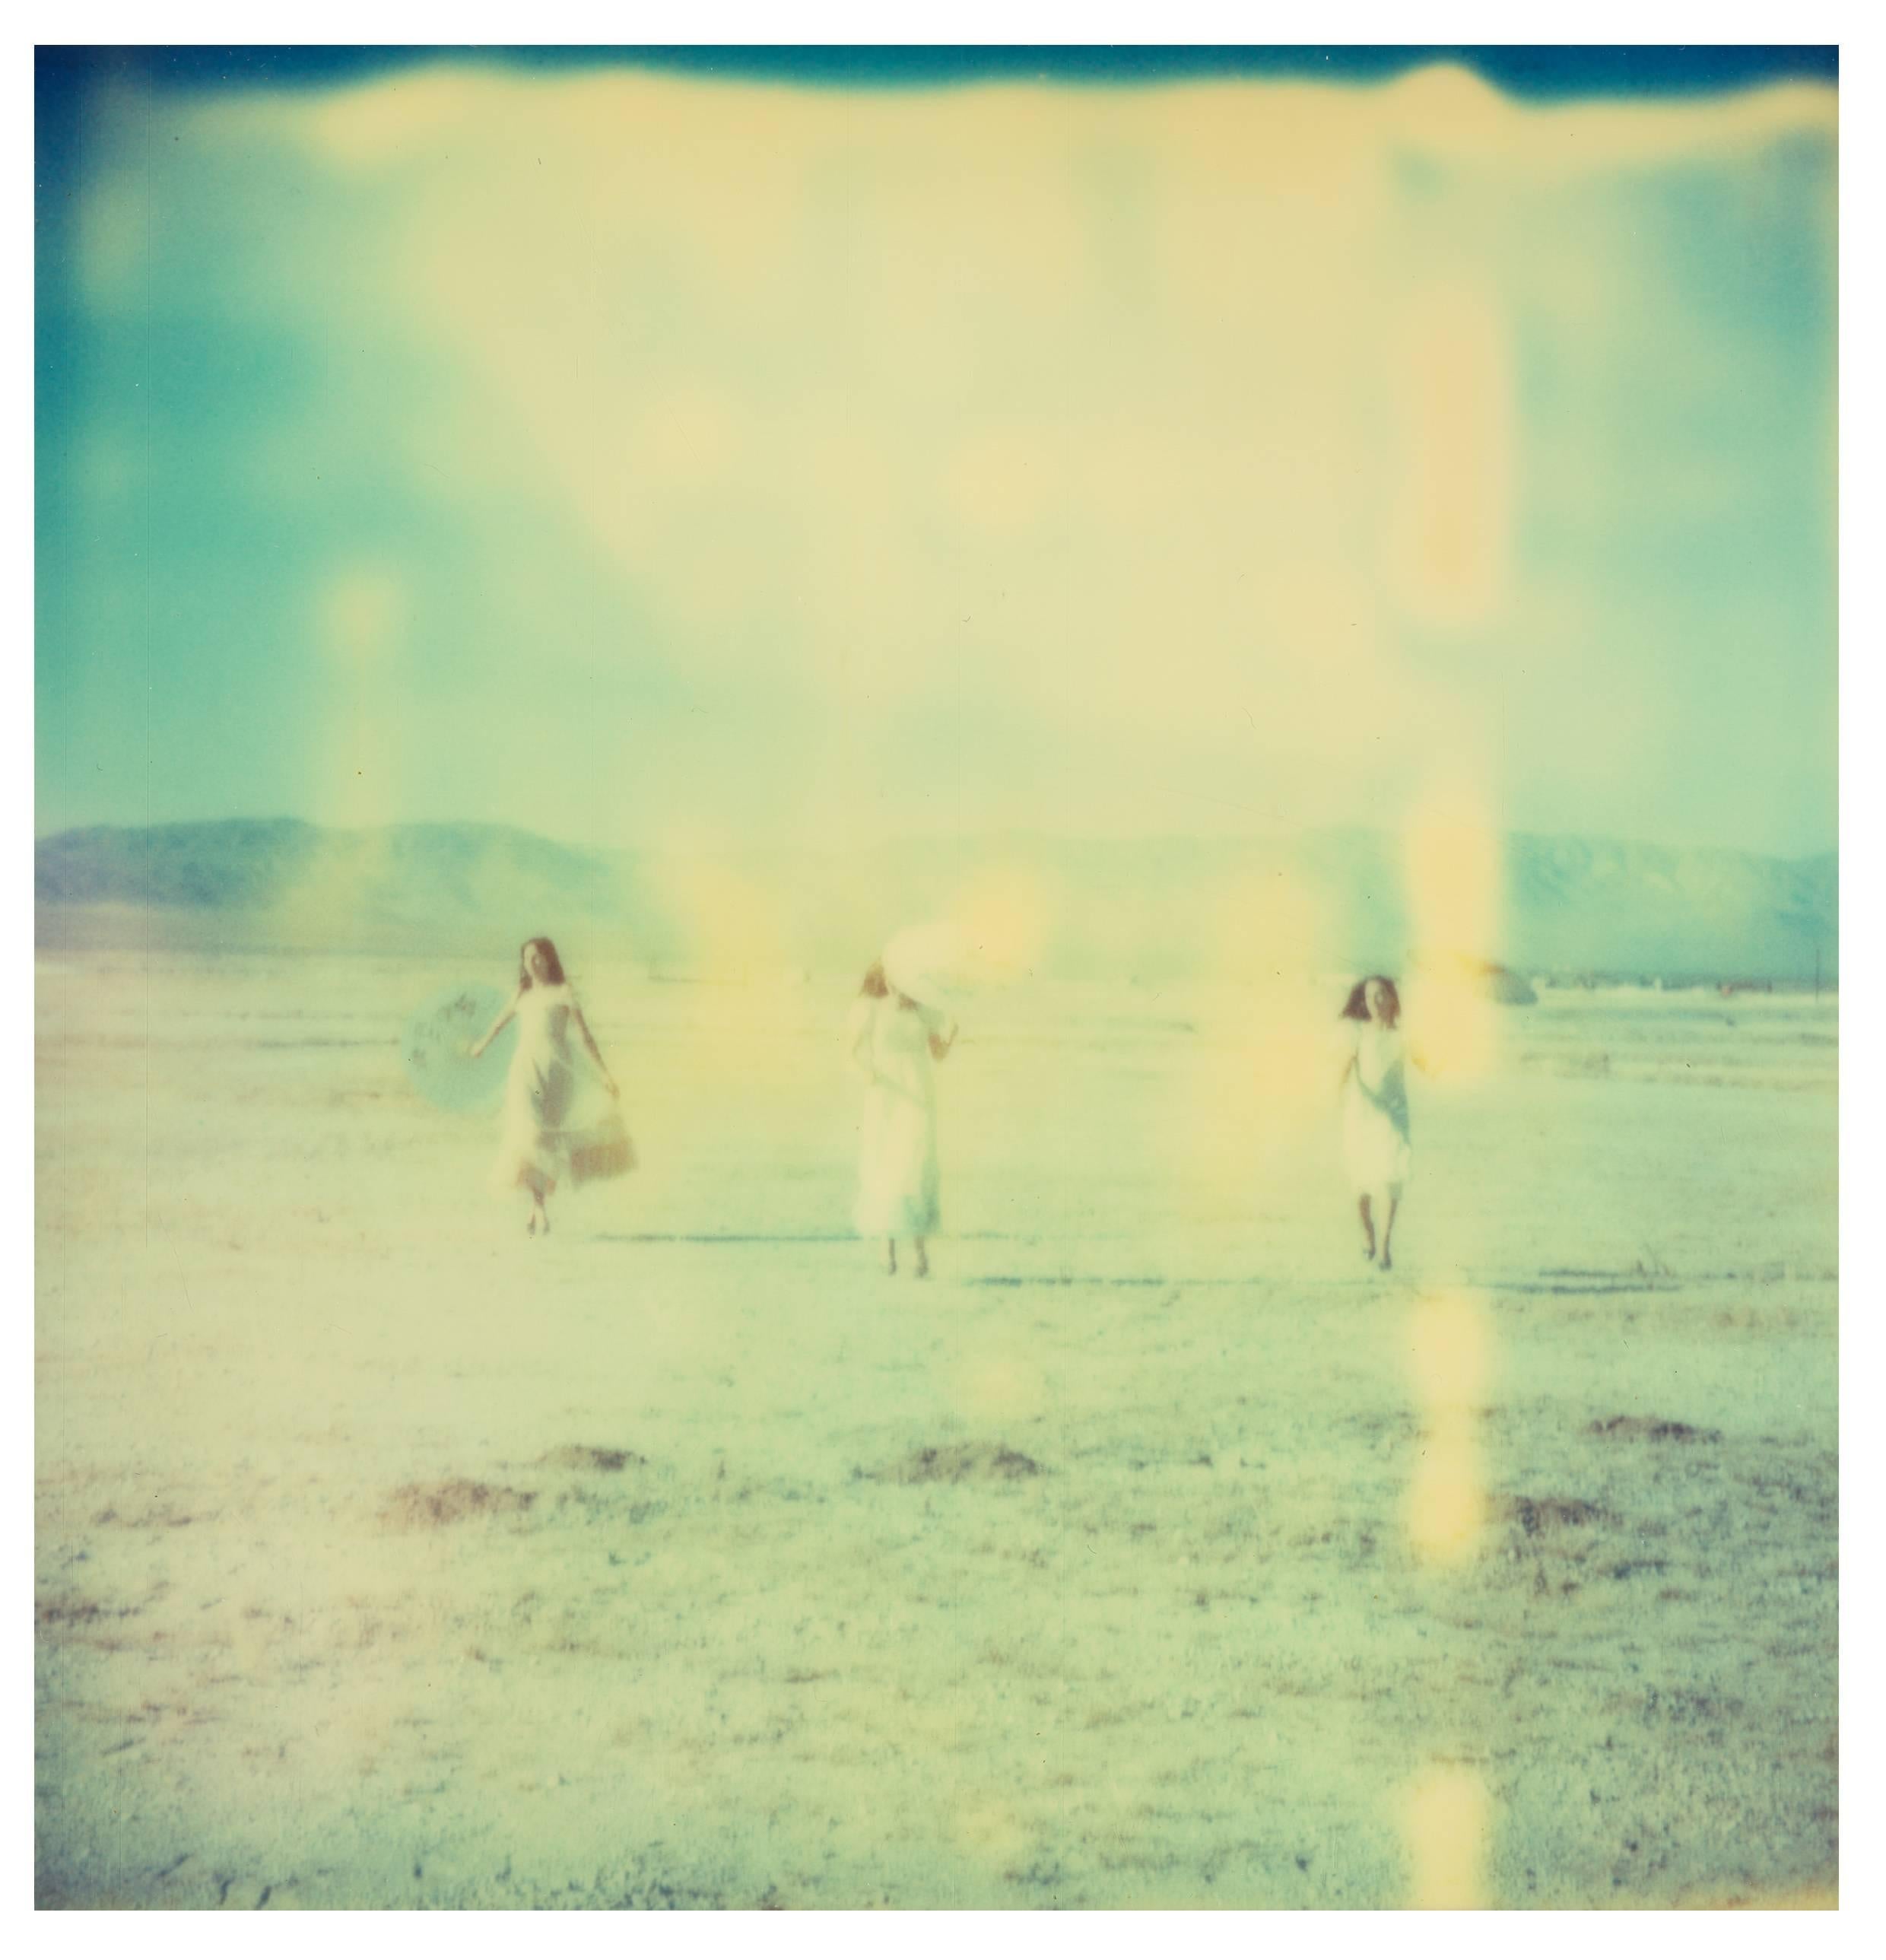 'Enchanted' (Dream Scene on Salt Lake), triptych, from the 29 Palms, CA Project

Edition 4/10. 
Each 20x20cm, together 20x70cm (installed). 
3 Archivall C-Prints, based on 3 SX-70 Polaroids. 
Certificate and Signature label. 
Artist Inventory #